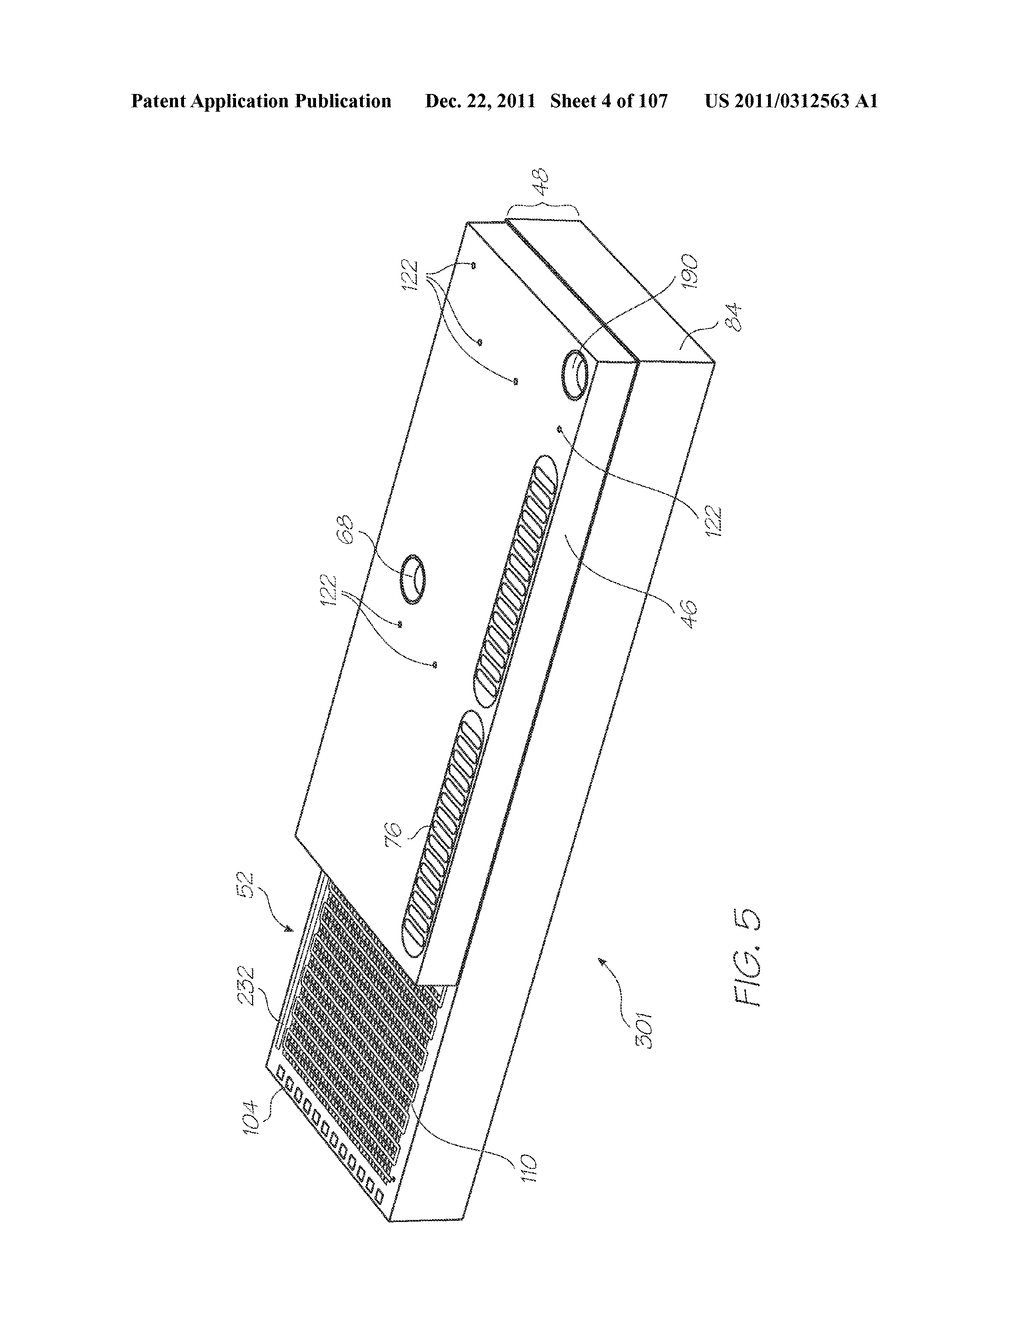 LOC DEVICE FOR DETECTING TARGET NUCLEIC ACID SEQUENCES IN A FLUID USING     HYBRIDIZATION CHAMBER ARRAY AND NEGATIVE CONTROL CHAMBER CONTAINING     ELECTROCHEMILUMINESCENT PROBE DESIGNED TO BE NON-COMPLEMENTARY TO ANY     SEQUENCE IN THE FLUID - diagram, schematic, and image 05